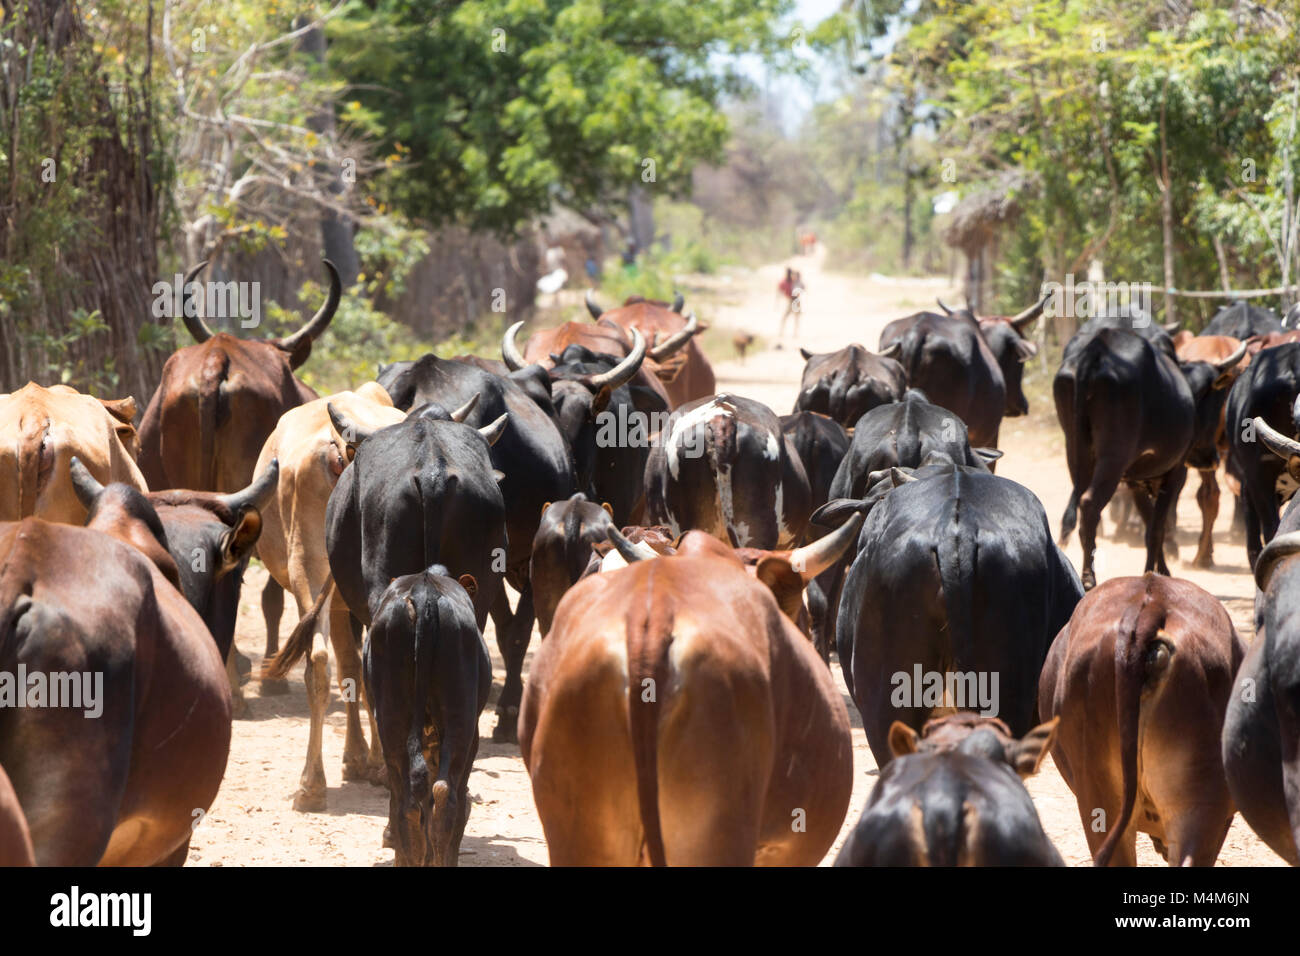 Cattle being herded down the middle of a dirt road Stock Photo